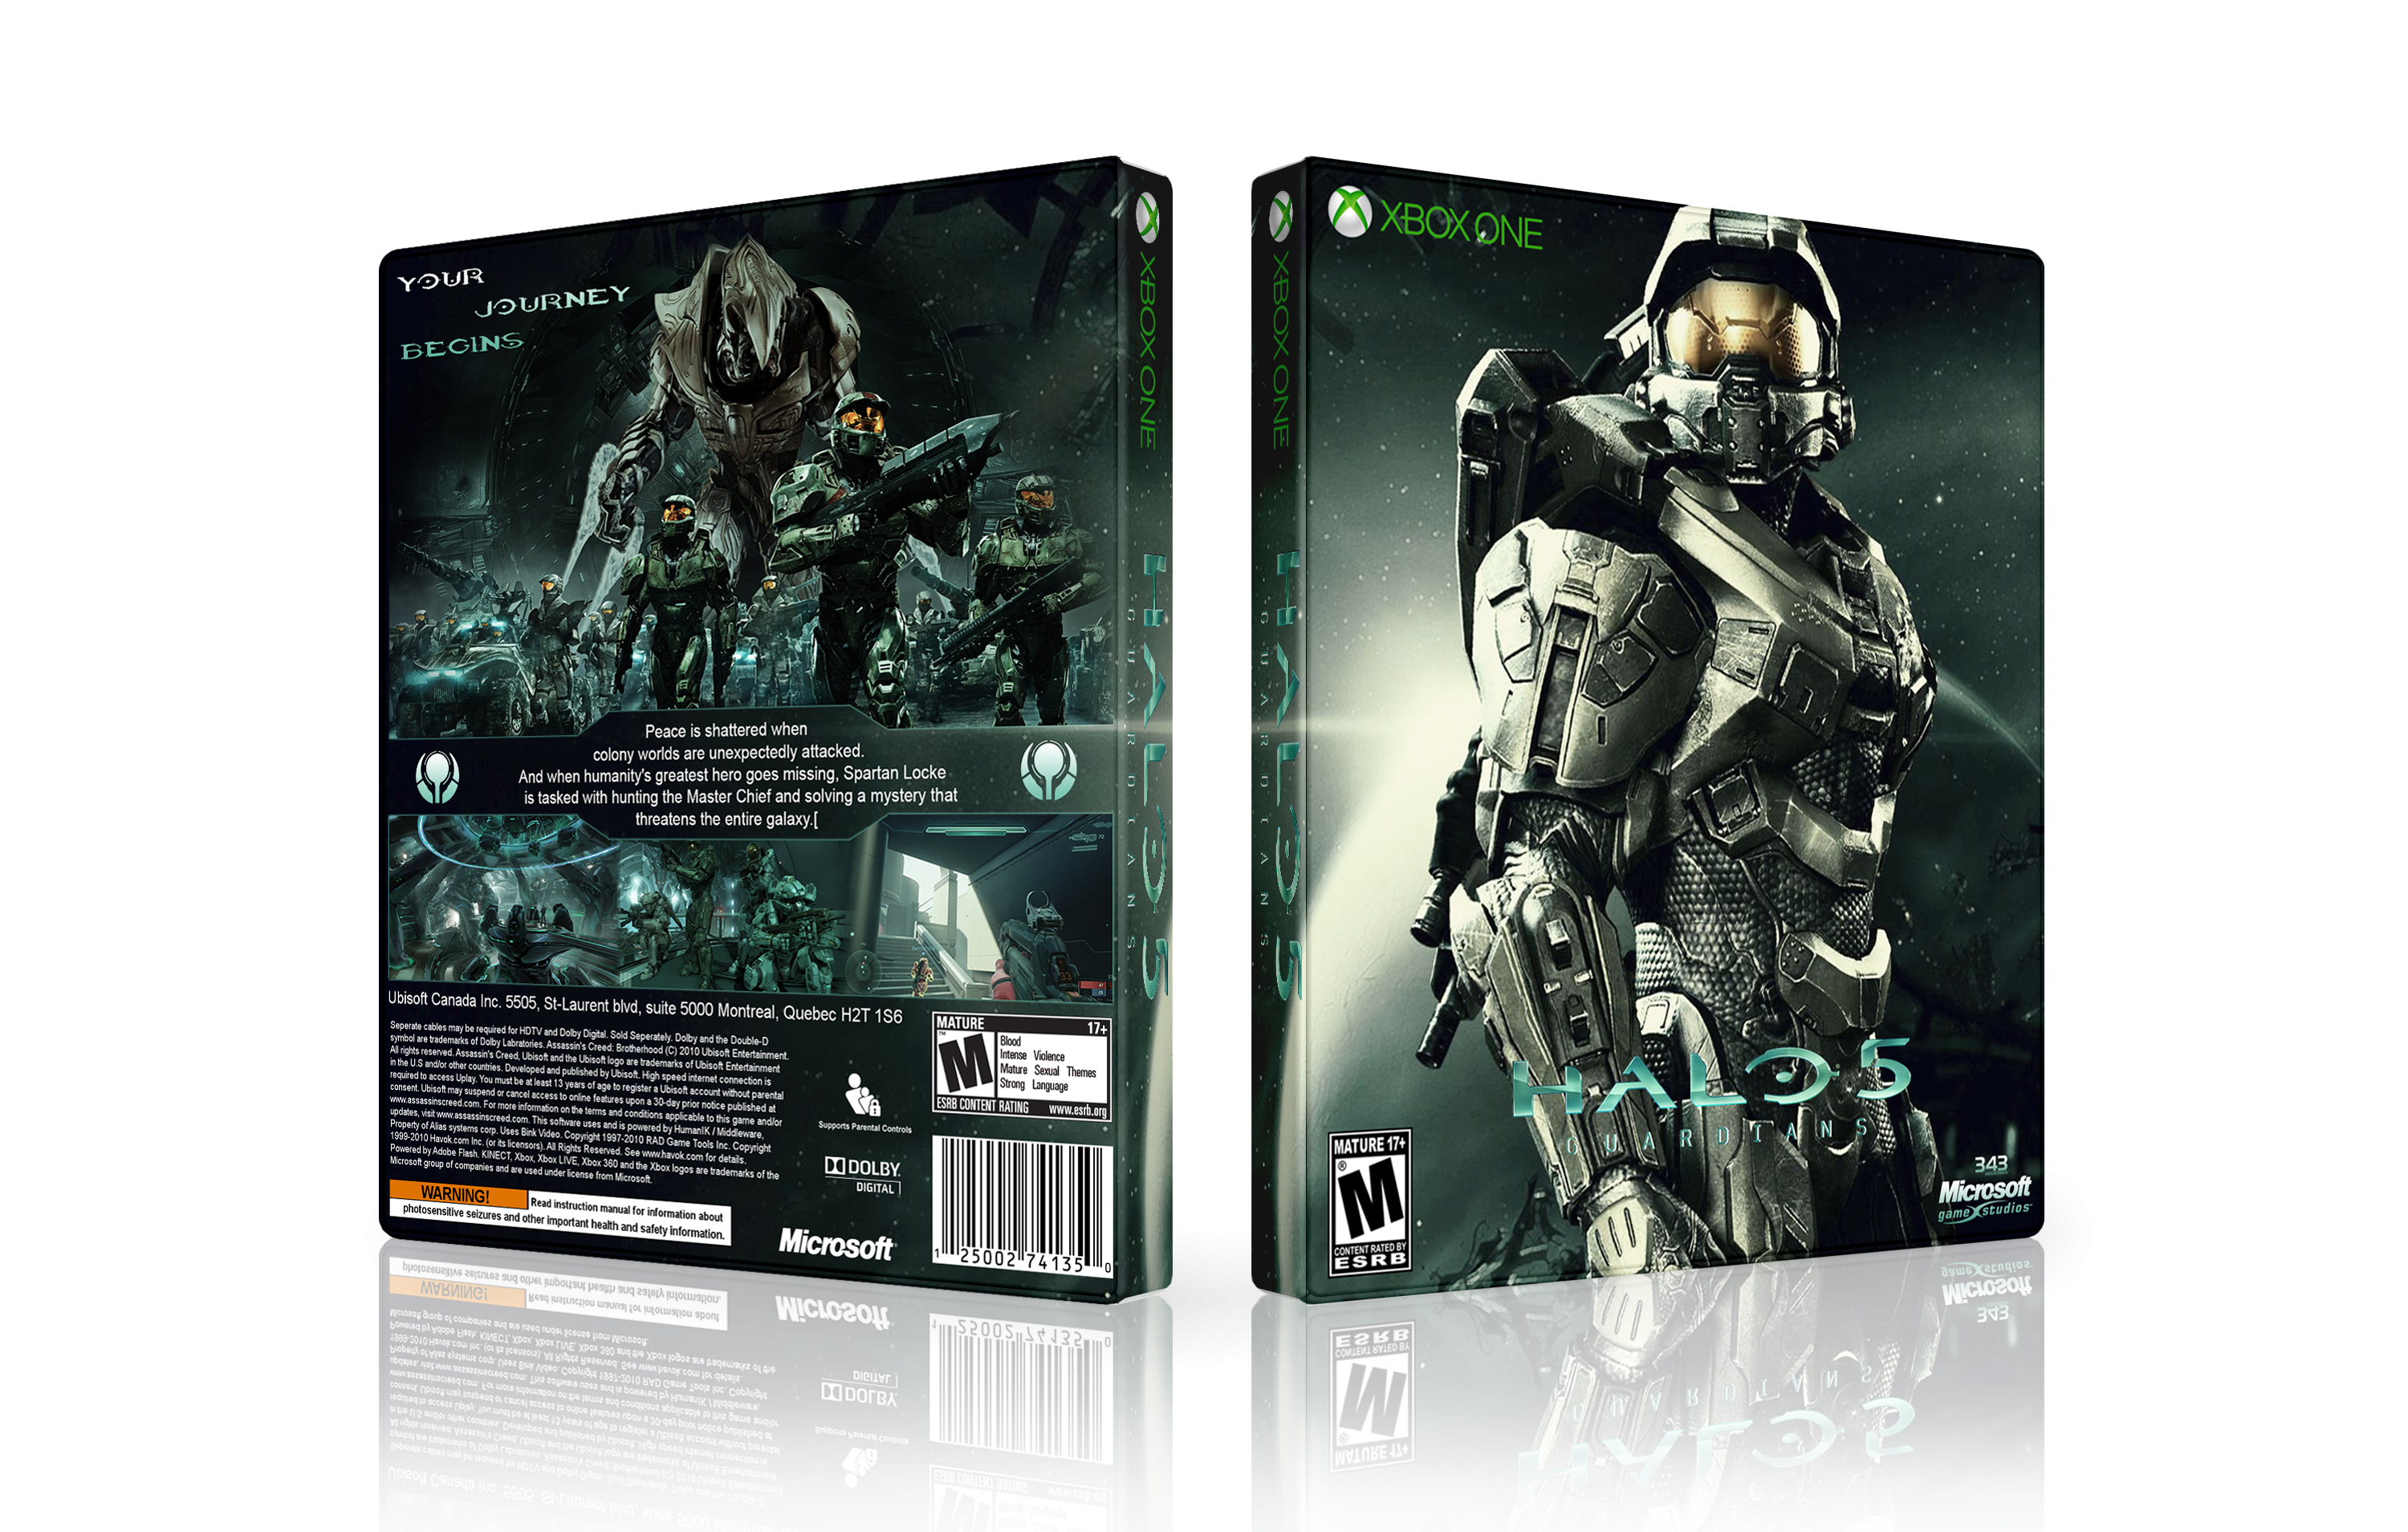 Halo 5 Guardians box cover